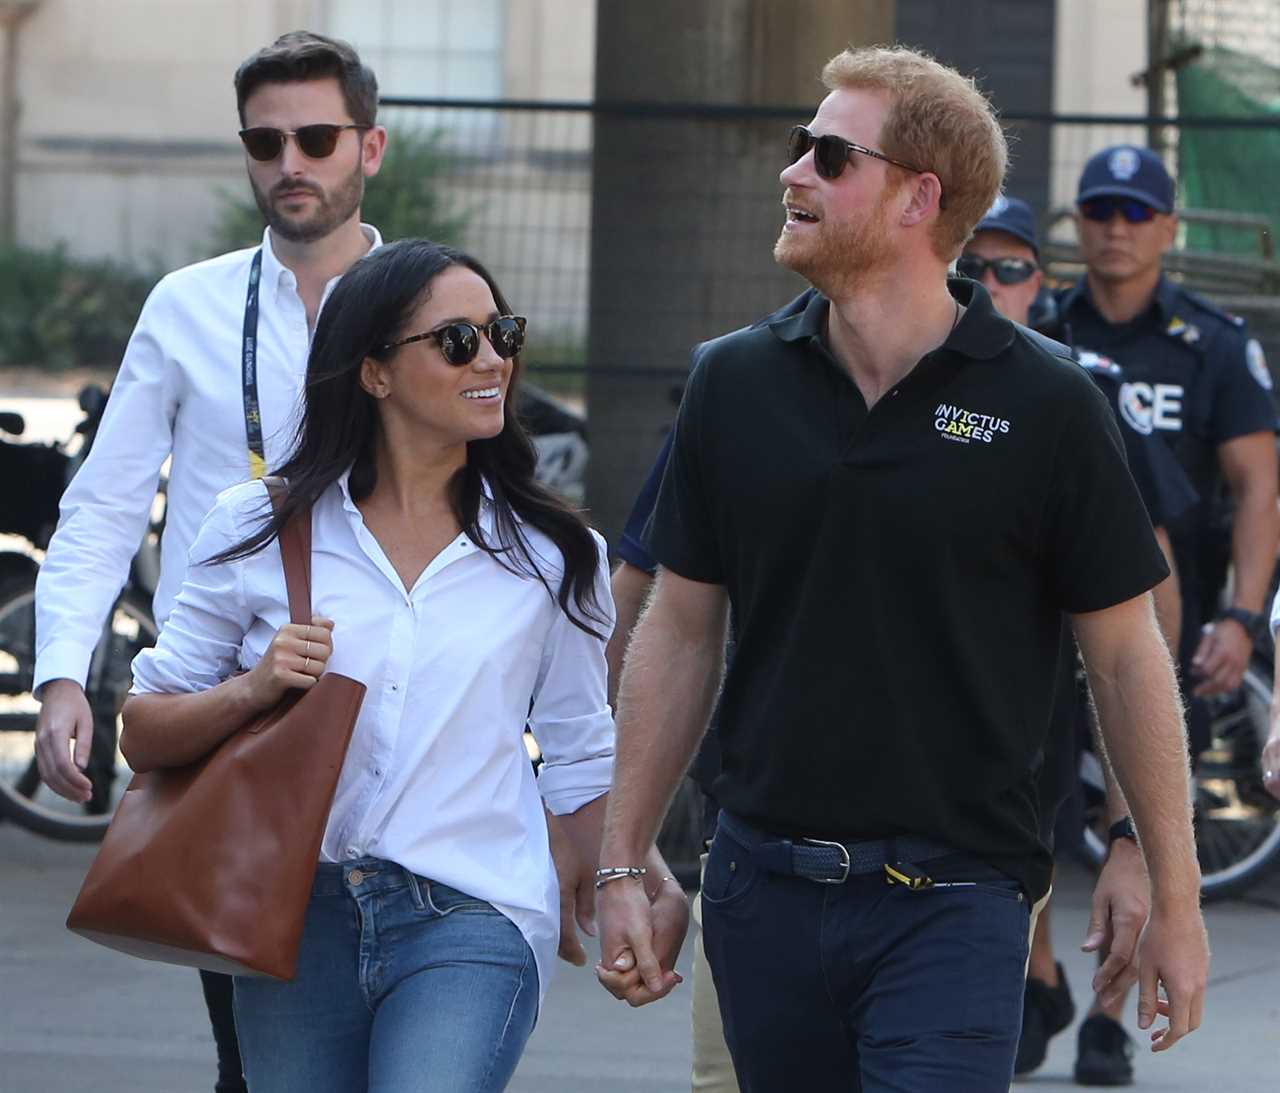 Prince Harry & Meghan Markle have a secret ritual to communicating how they feel without words, says body language pro